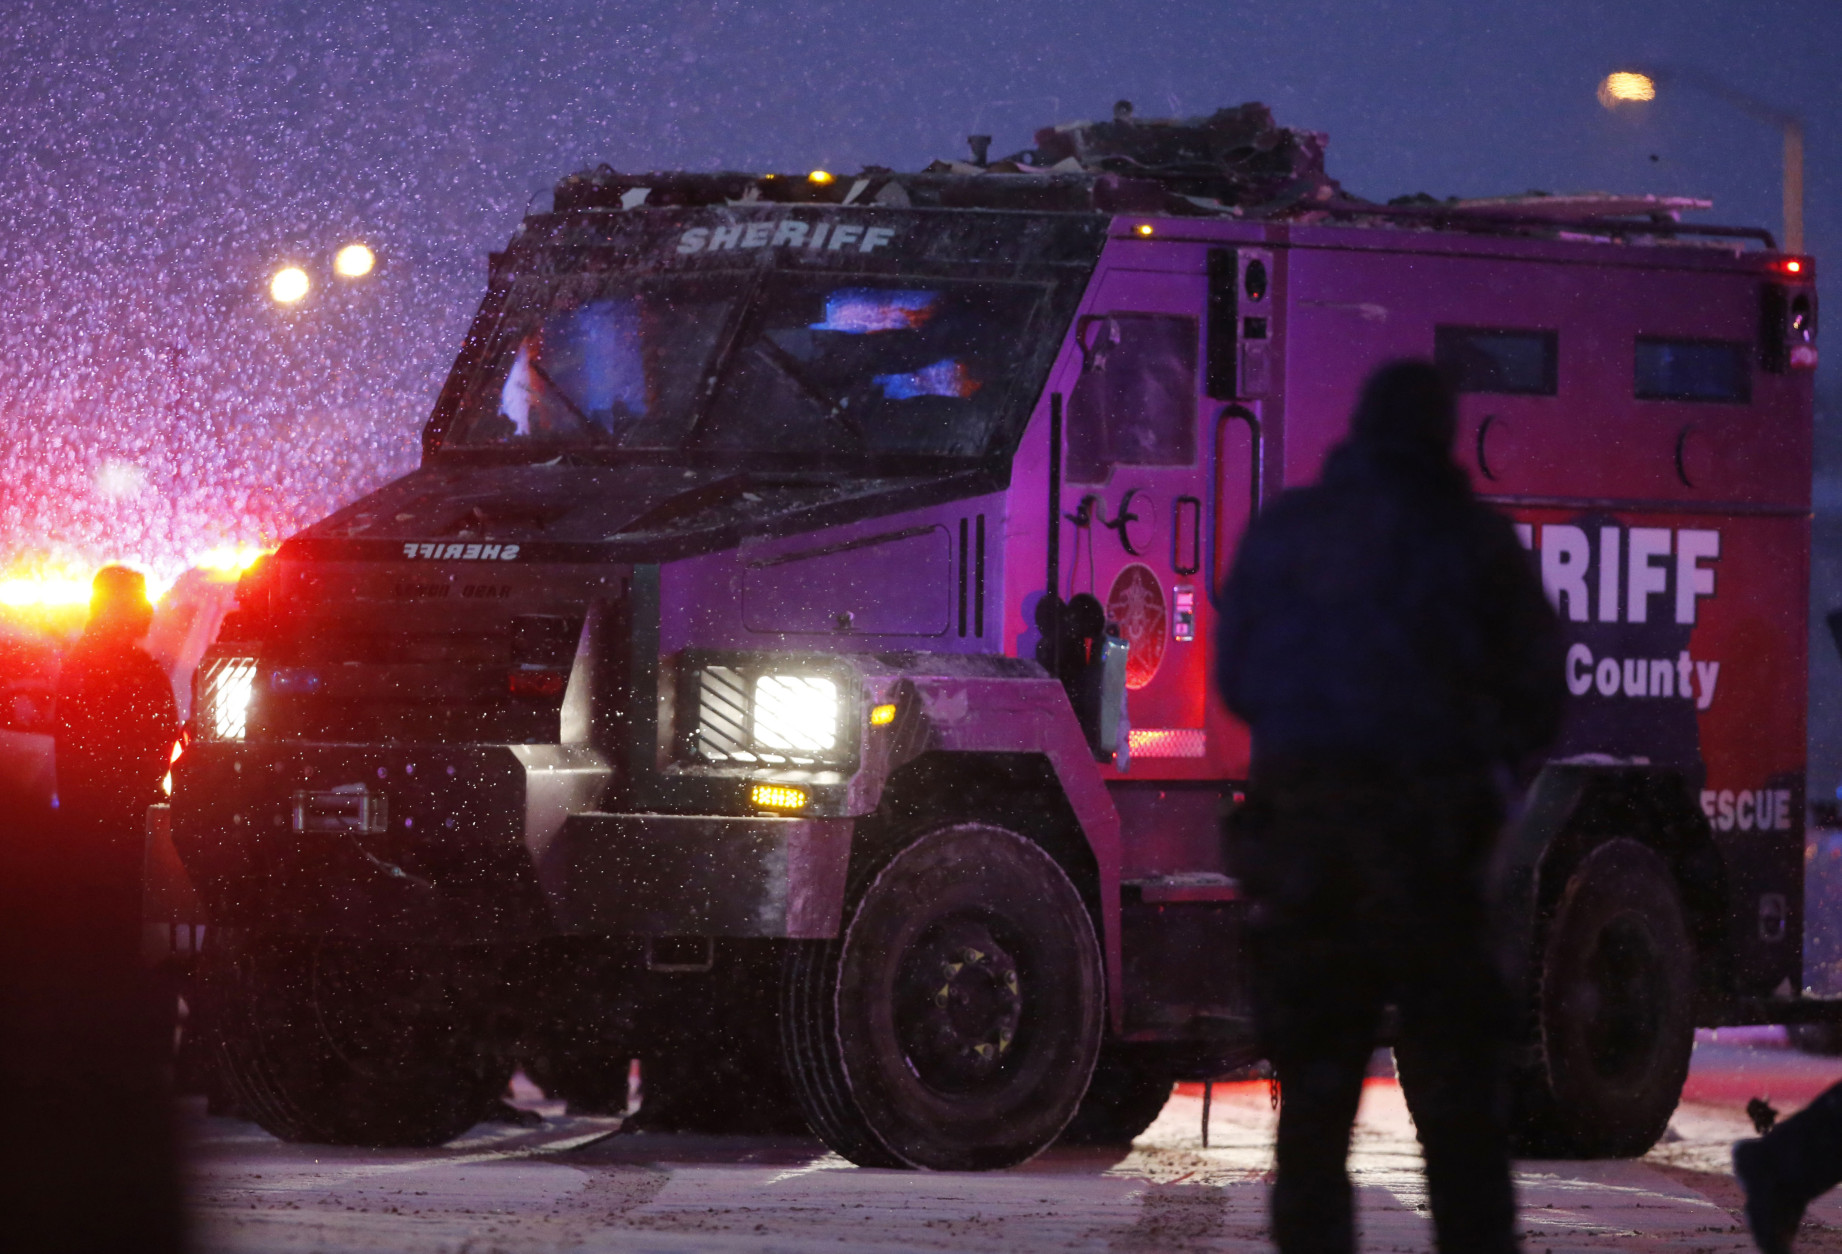 A police vehicle, carrying a suspect, is lead away after a shooting at a Planned Parenthood clinic Friday, Nov. 27, 2015, in Colorado Springs, Colo. A gunman opened fire at the clinic on Friday, authorities said, wounding multiple people. (AP Photo/David Zalubowski)